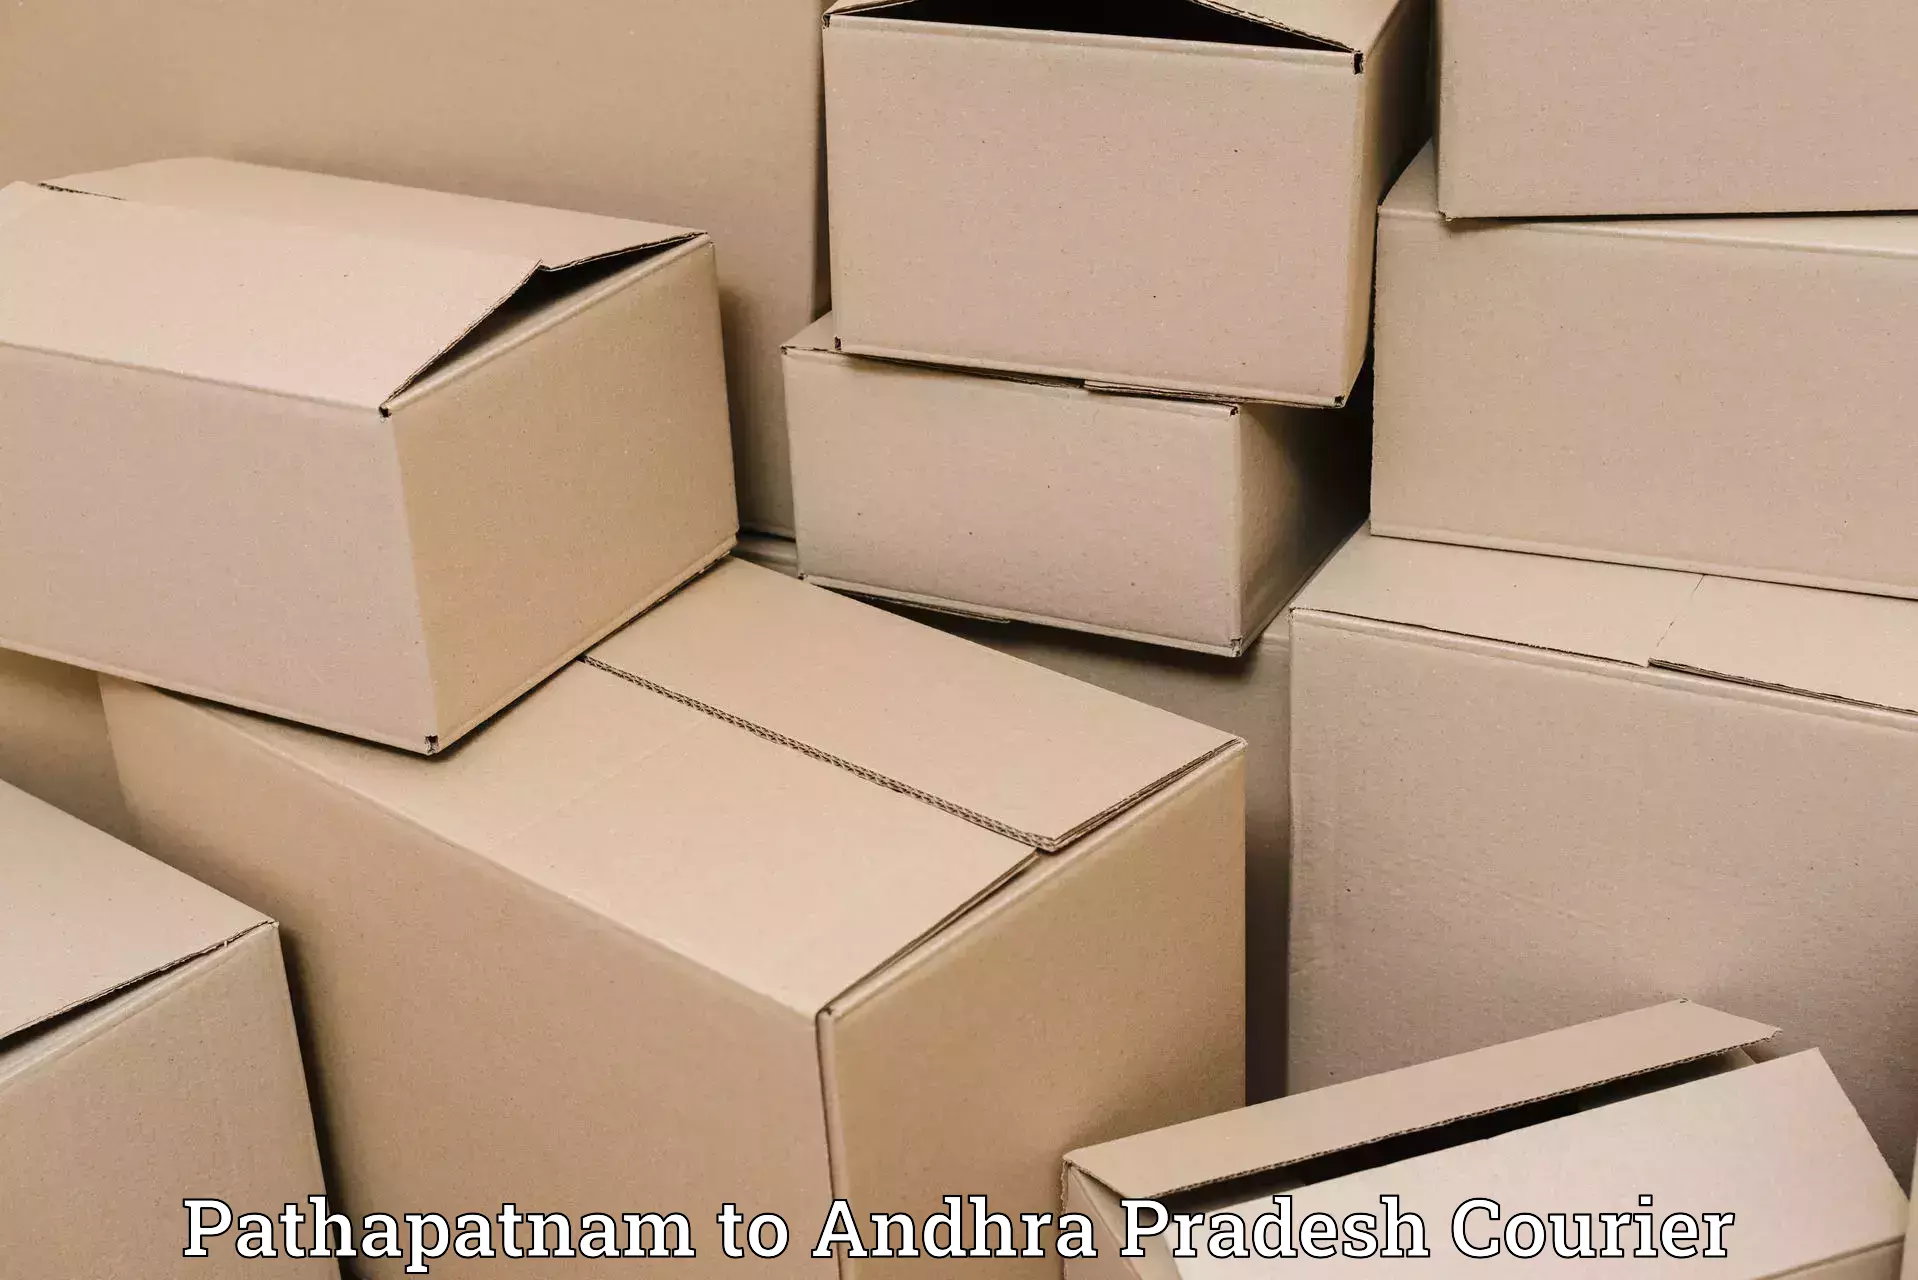 Efficient cargo handling in Pathapatnam to Addateegala